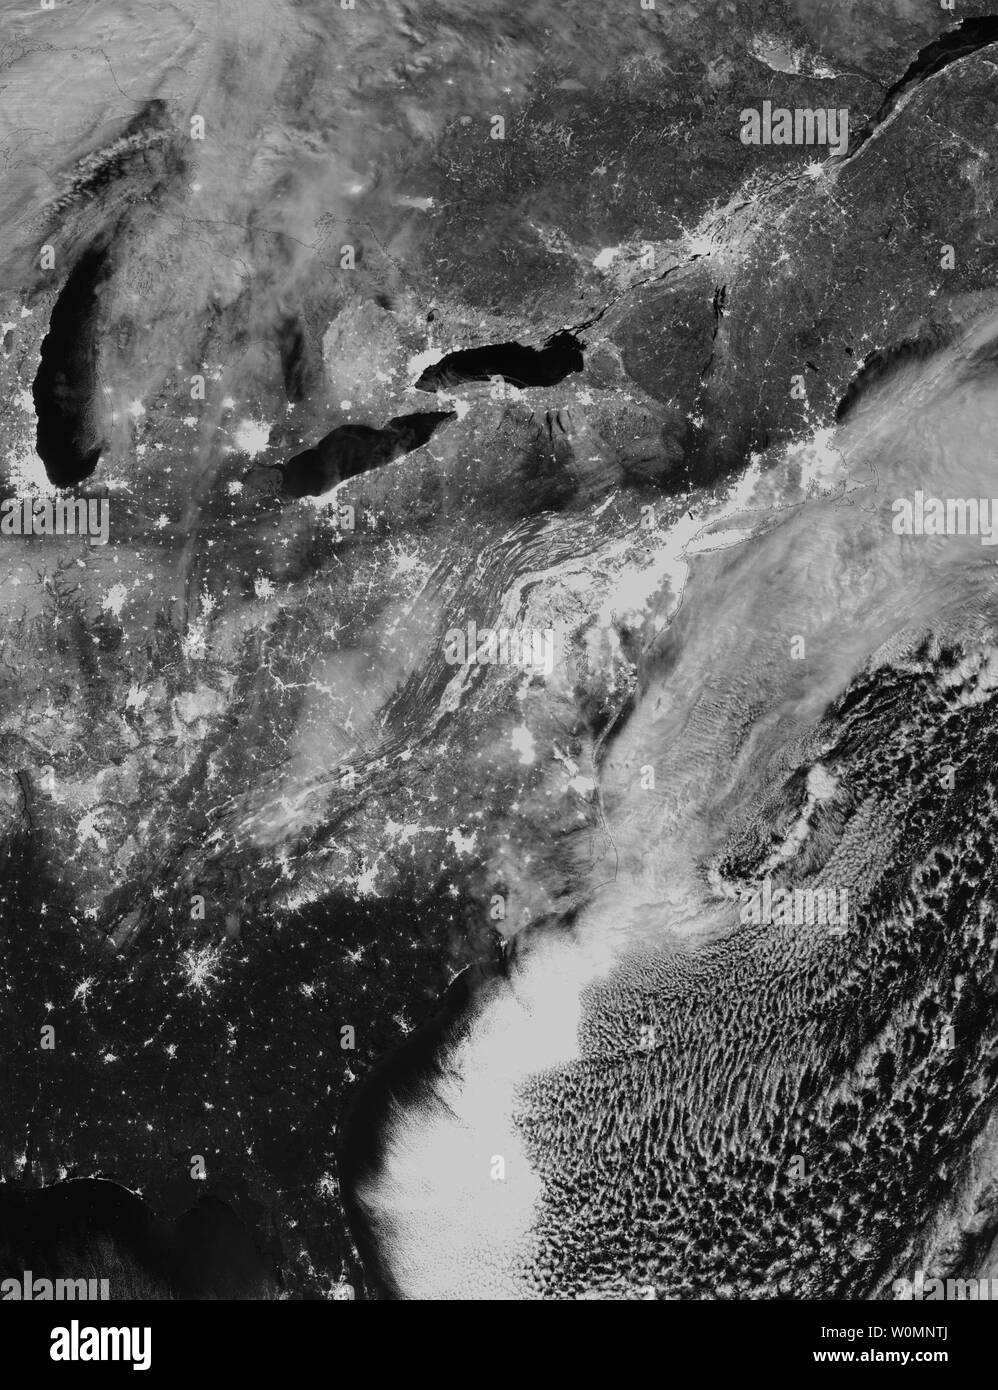 NASA and NOAA satellites are tracking the large winter storm that is expected to bring heavy snowfall to the U.S. mid-Atlantic region on Jan. 22 and 23. NASA-NOAA's Suomi NPP satellite snapped this image of the approaching blizzard around 1:55 a.m. EST on January 24, 2016 using the Visible Infrared Imaging Radiometer Suite (VIIRS) instrument's Day-Night band. UPI Stock Photo